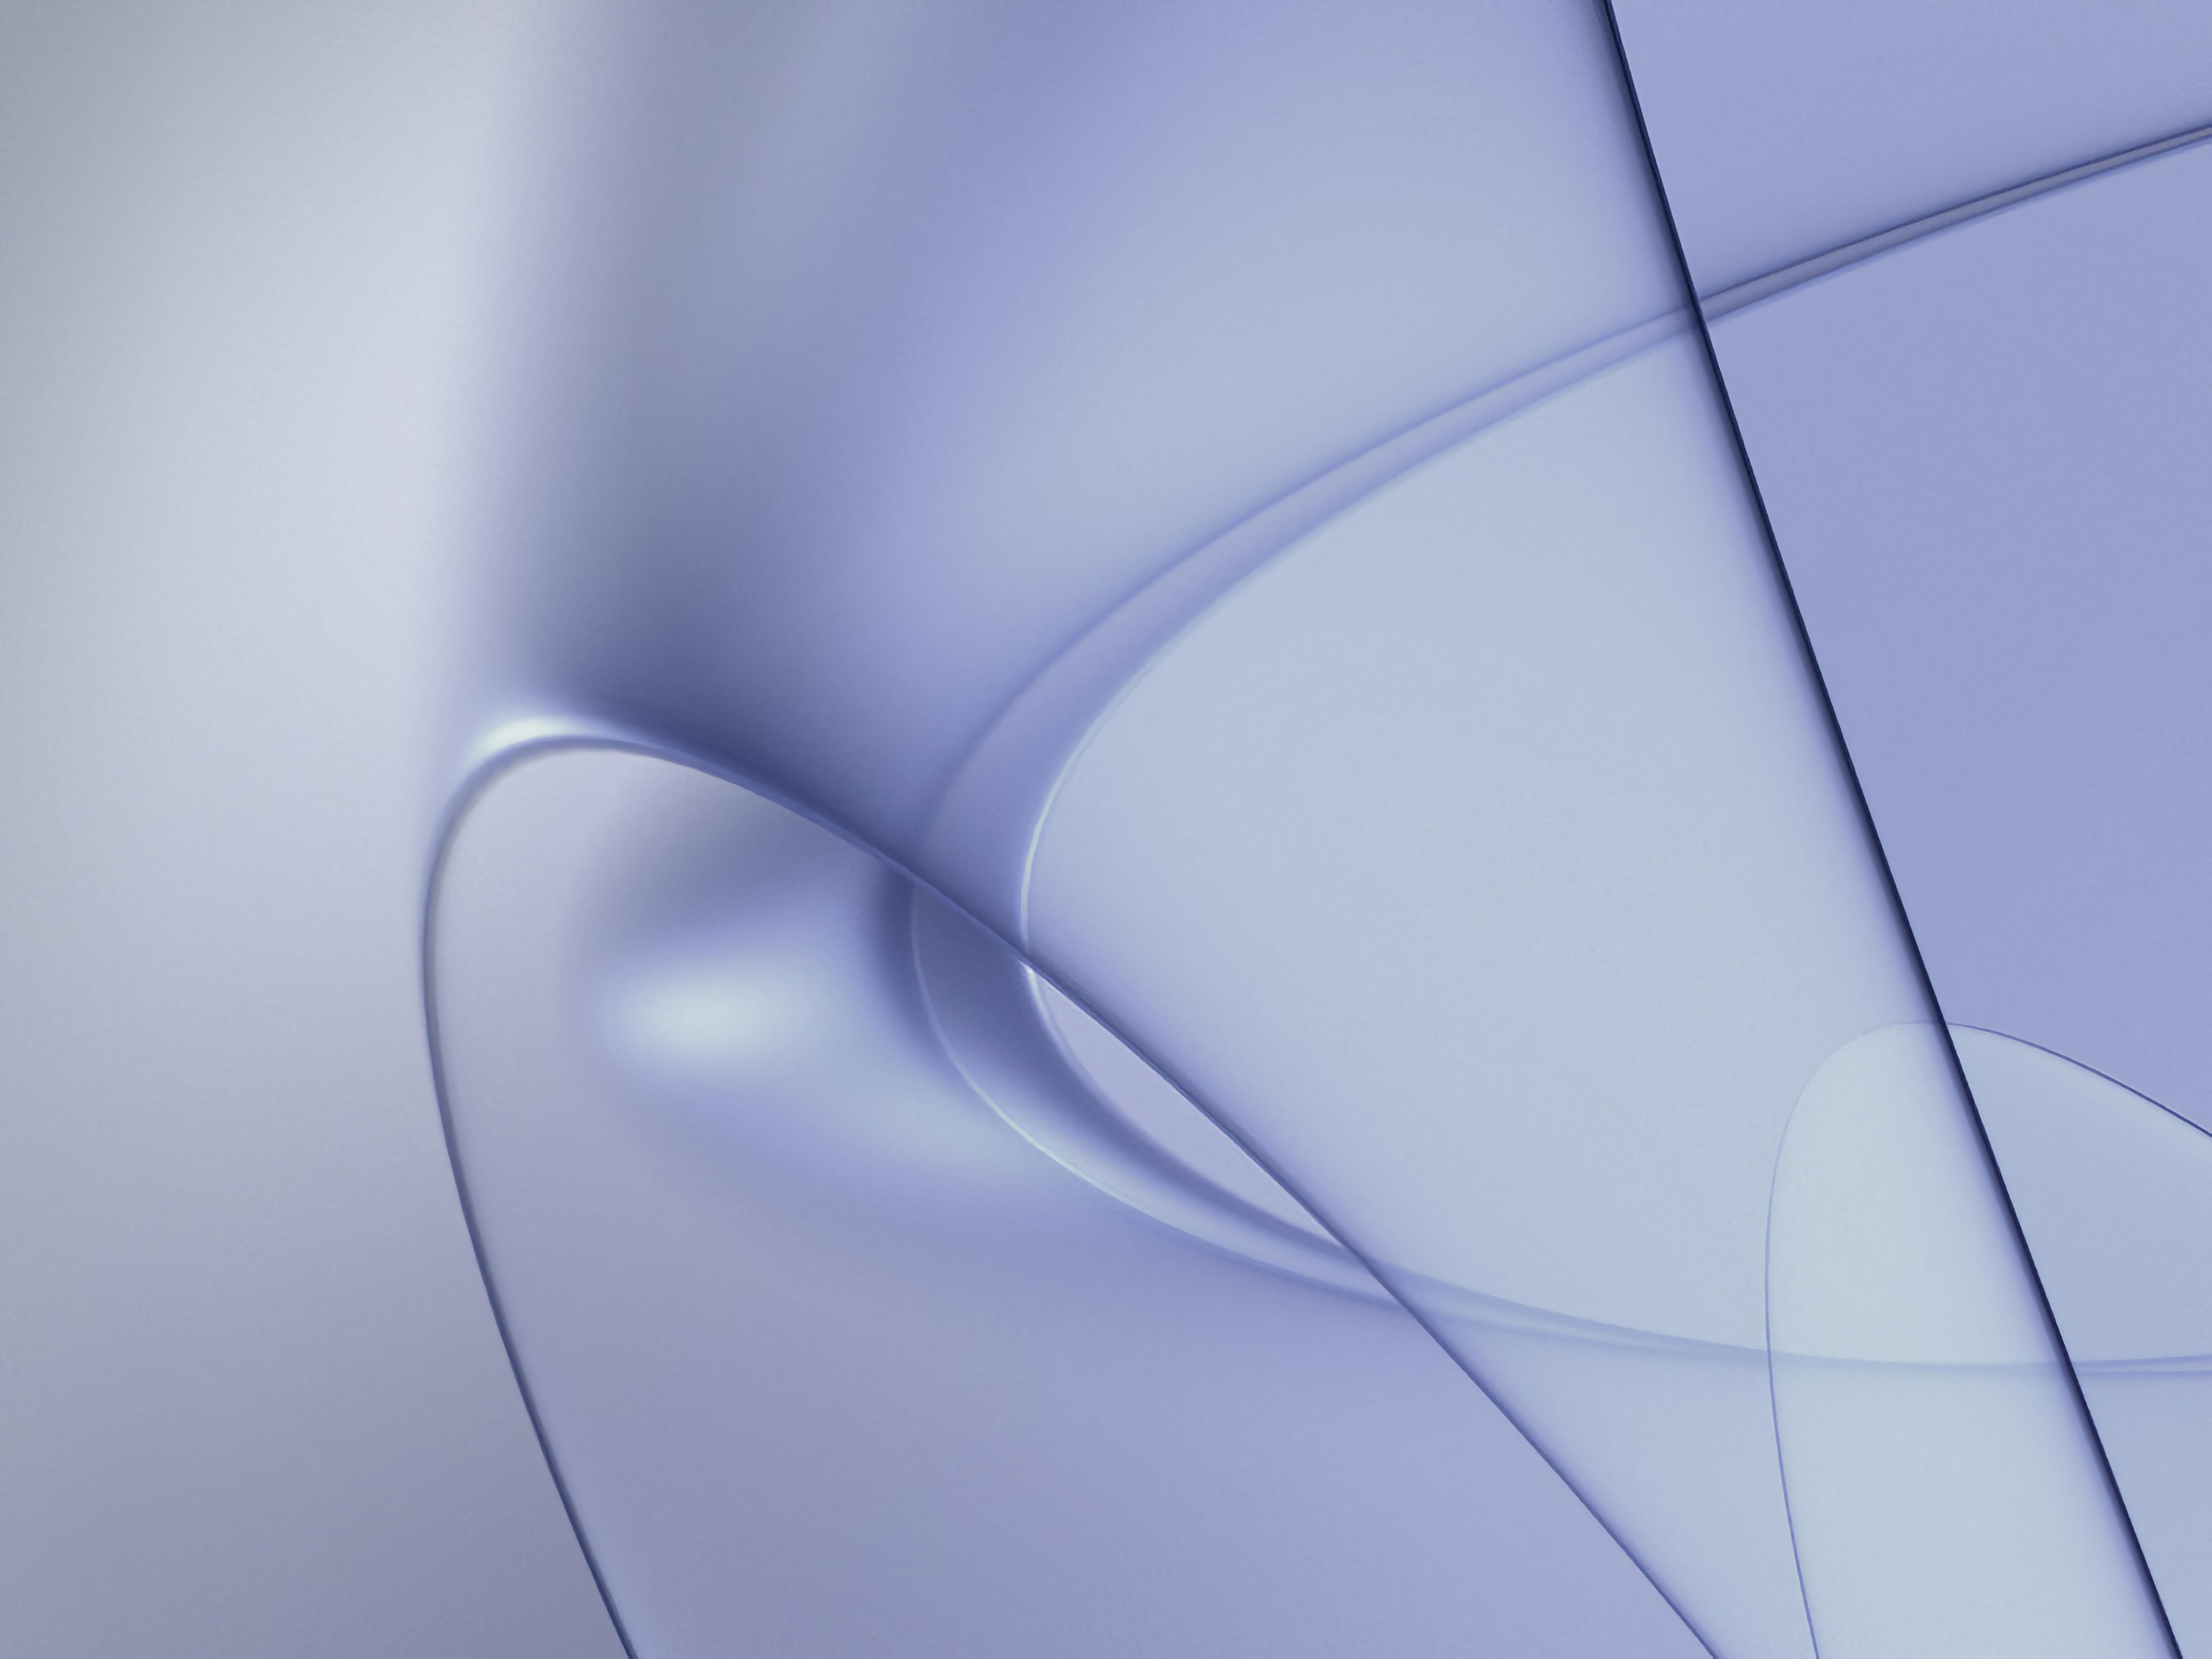 The most beautiful Mac os 9 desktop backgrounds you've ever seen